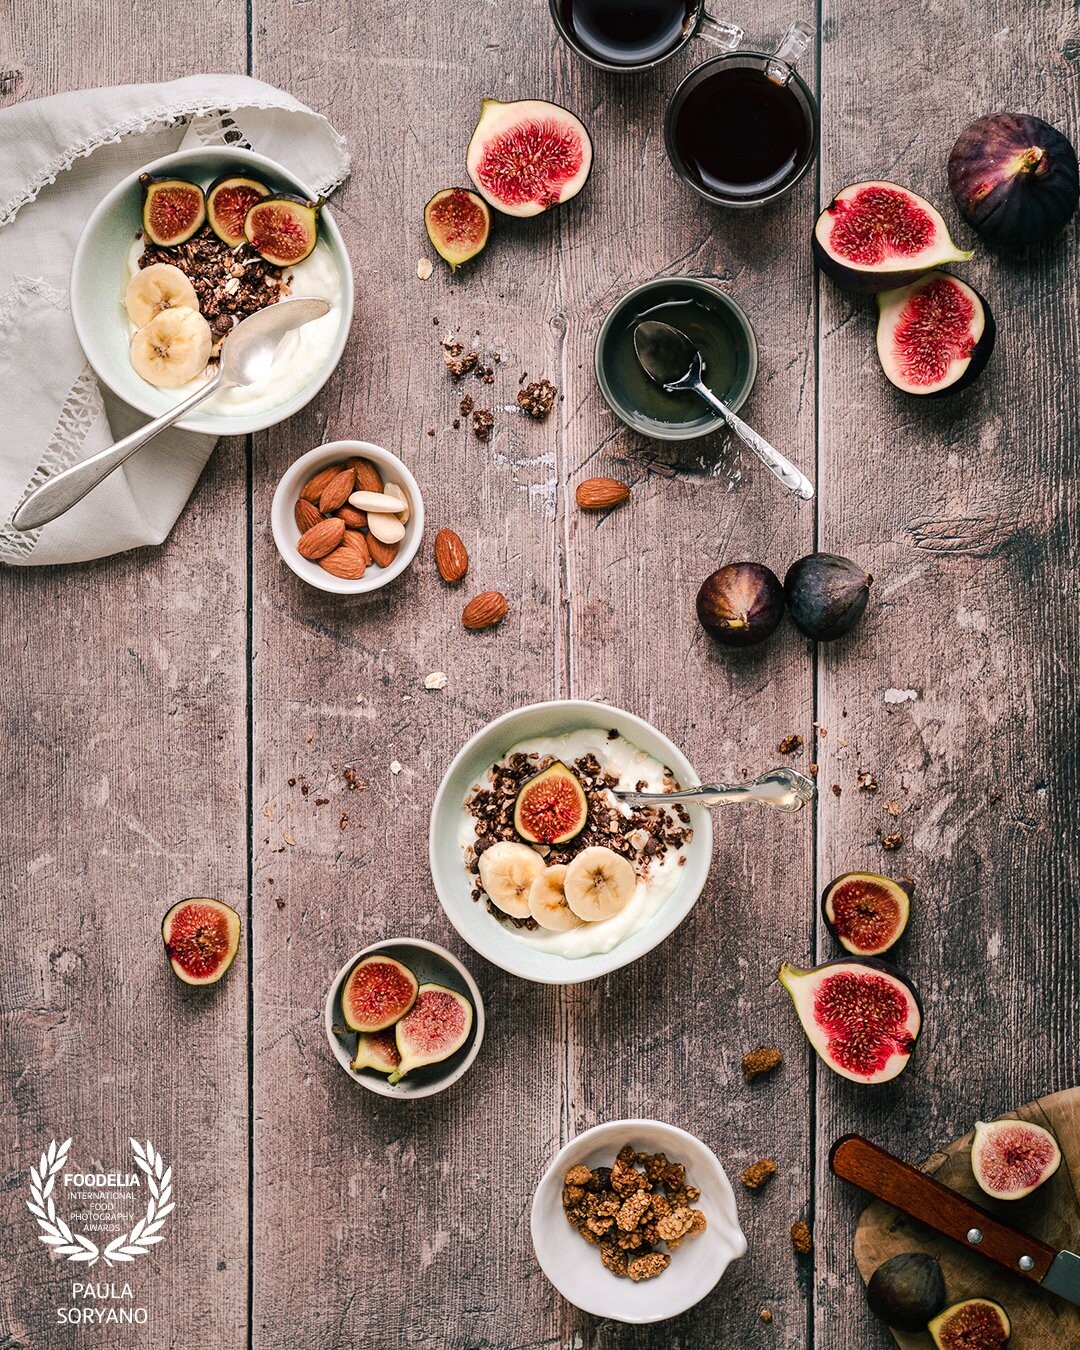 An early autumn breakfast inspired by the beauty of the figs, their color and texture. I wanted to capture something less minimalistic then usual & add a little bit of coziness and natural vibes to it.